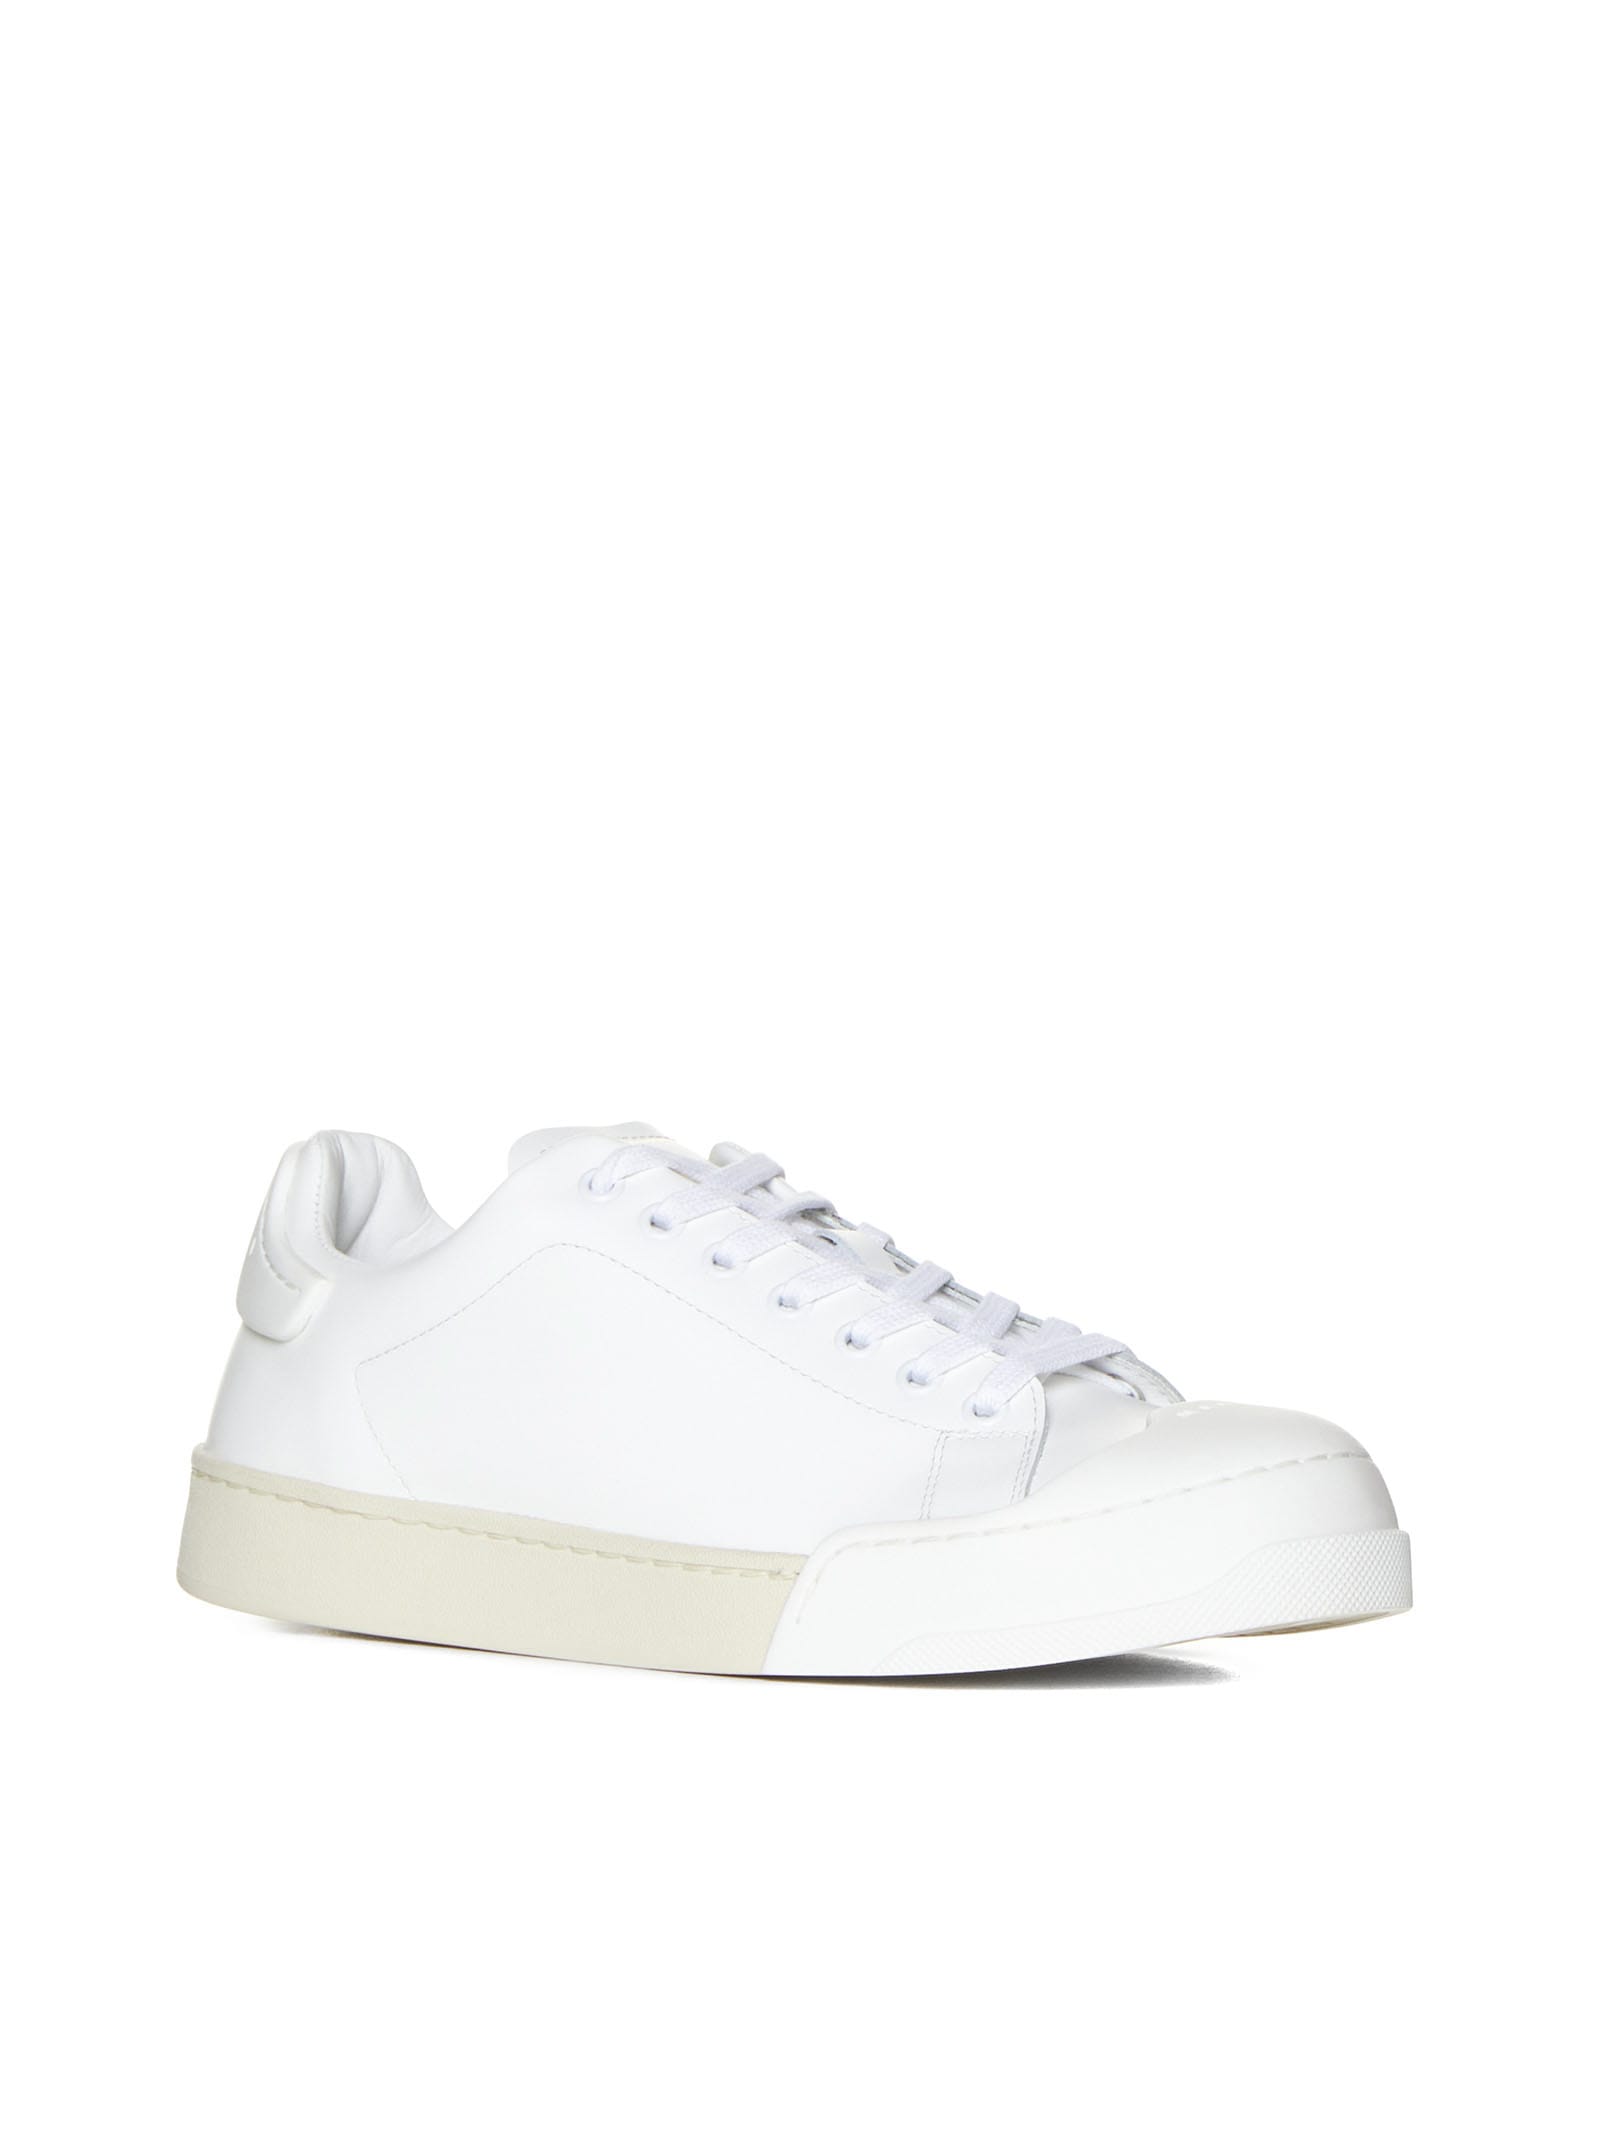 Shop Marni Sneakers In Lily White/lily White